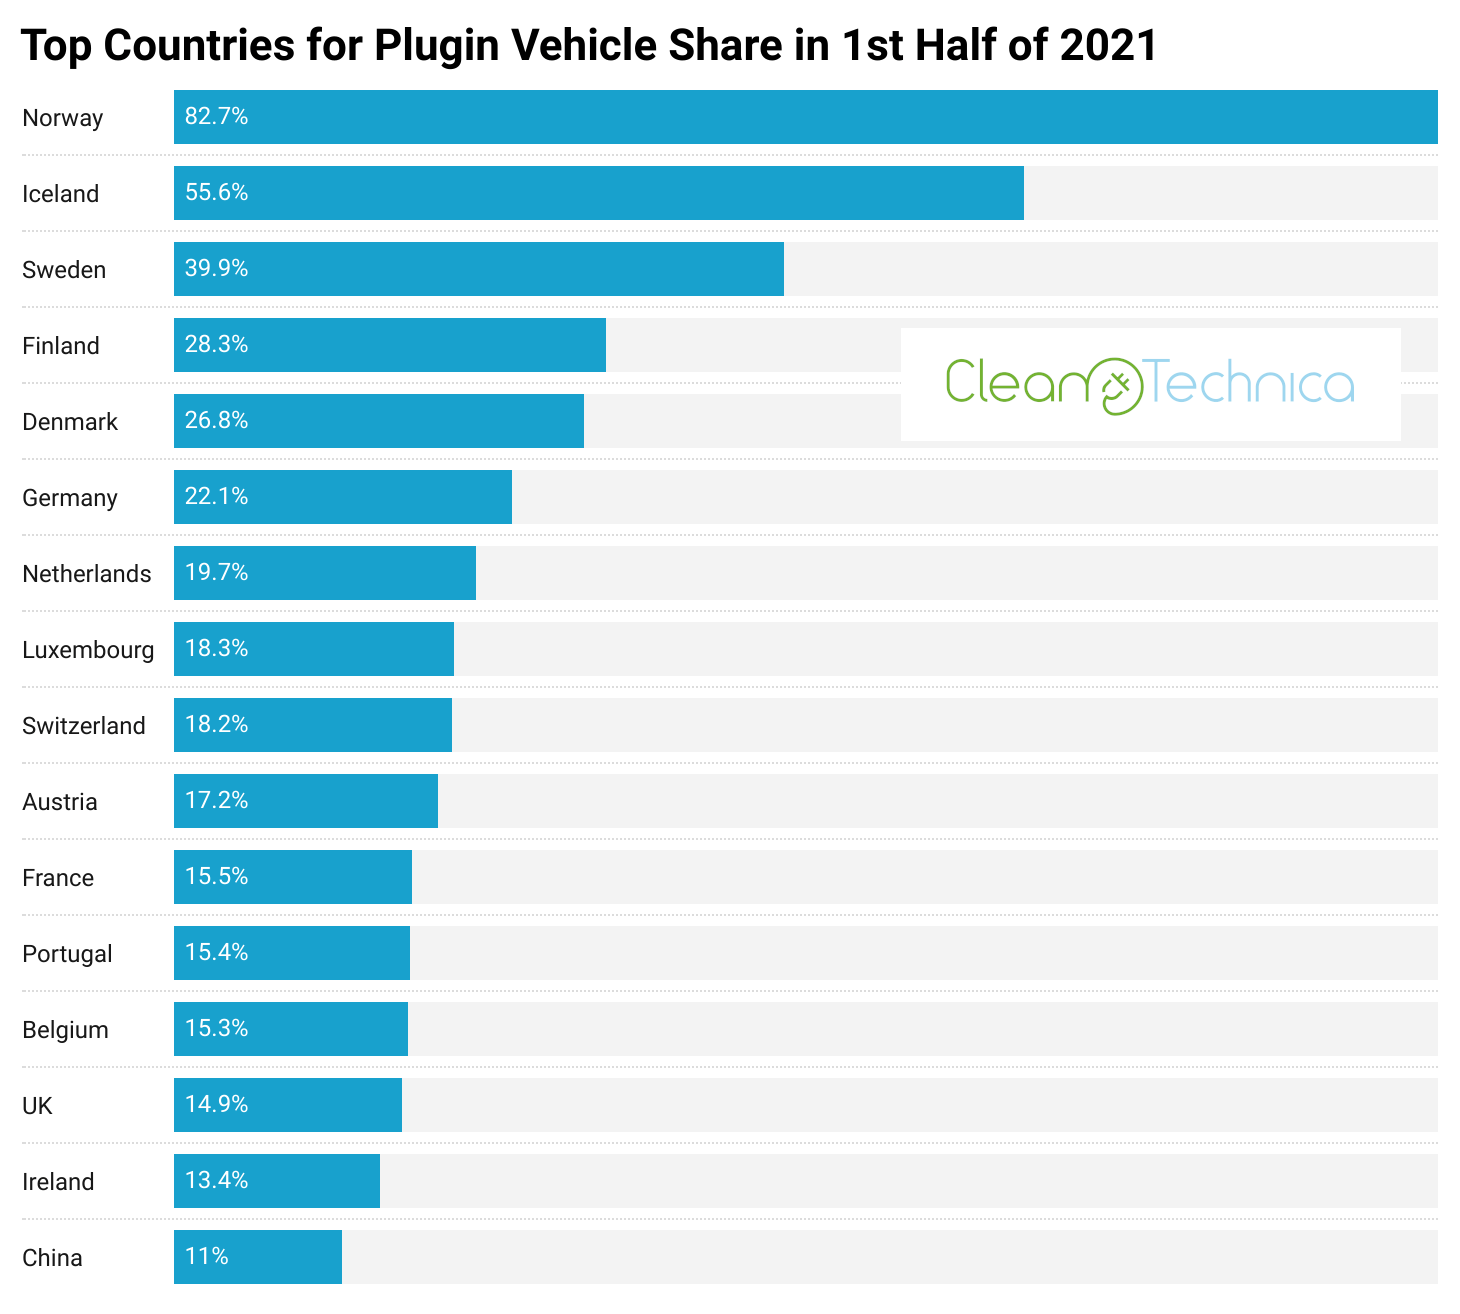 Top-countries-for-plugin-vehicle-share-in-1st-half-of-2021-watermark-logo